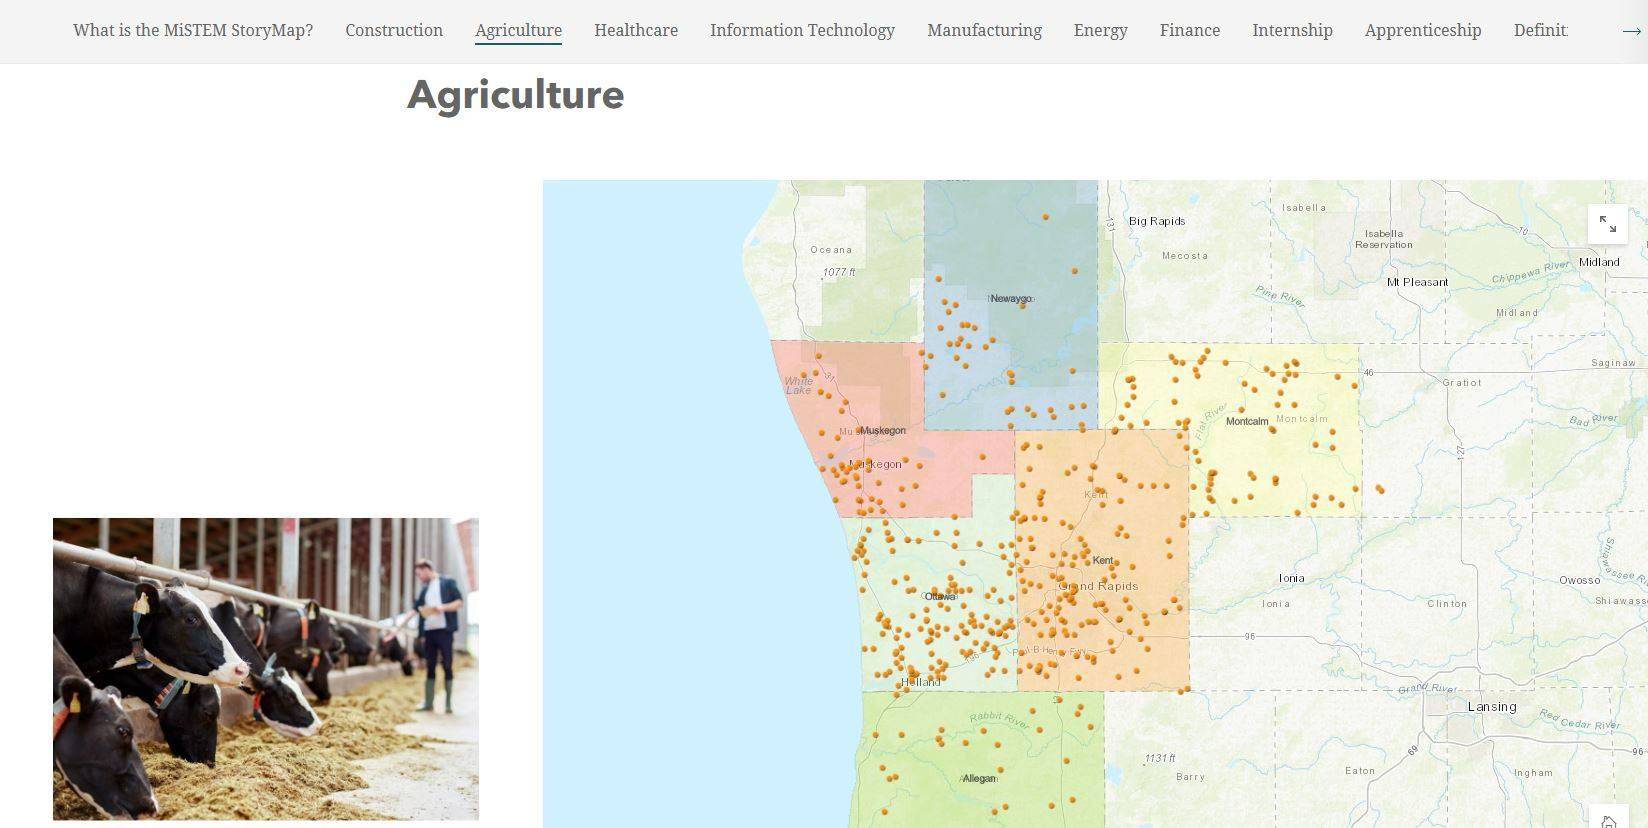 image of the agricultural map in West Michigan with an image of a famer and cows